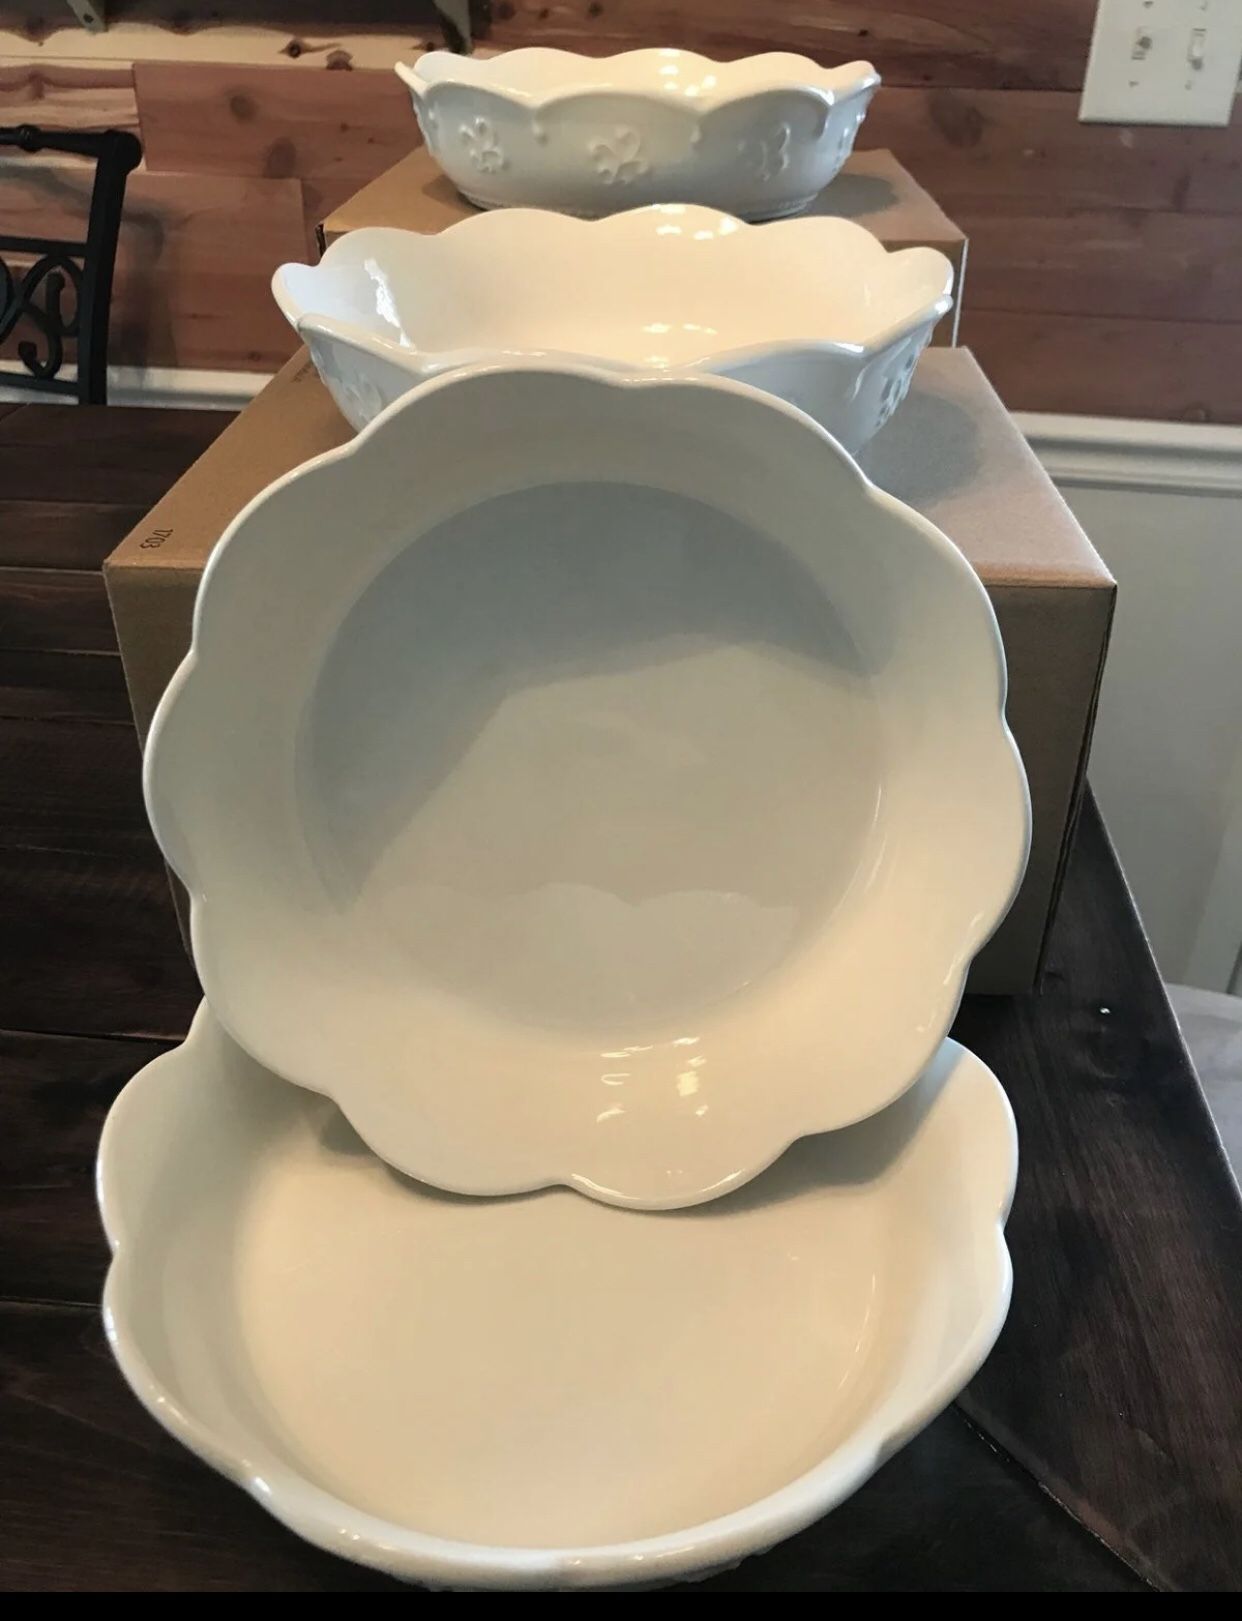 Brand new Caraway Soup bowl Gift Set for Sale in Glendale, AZ - OfferUp